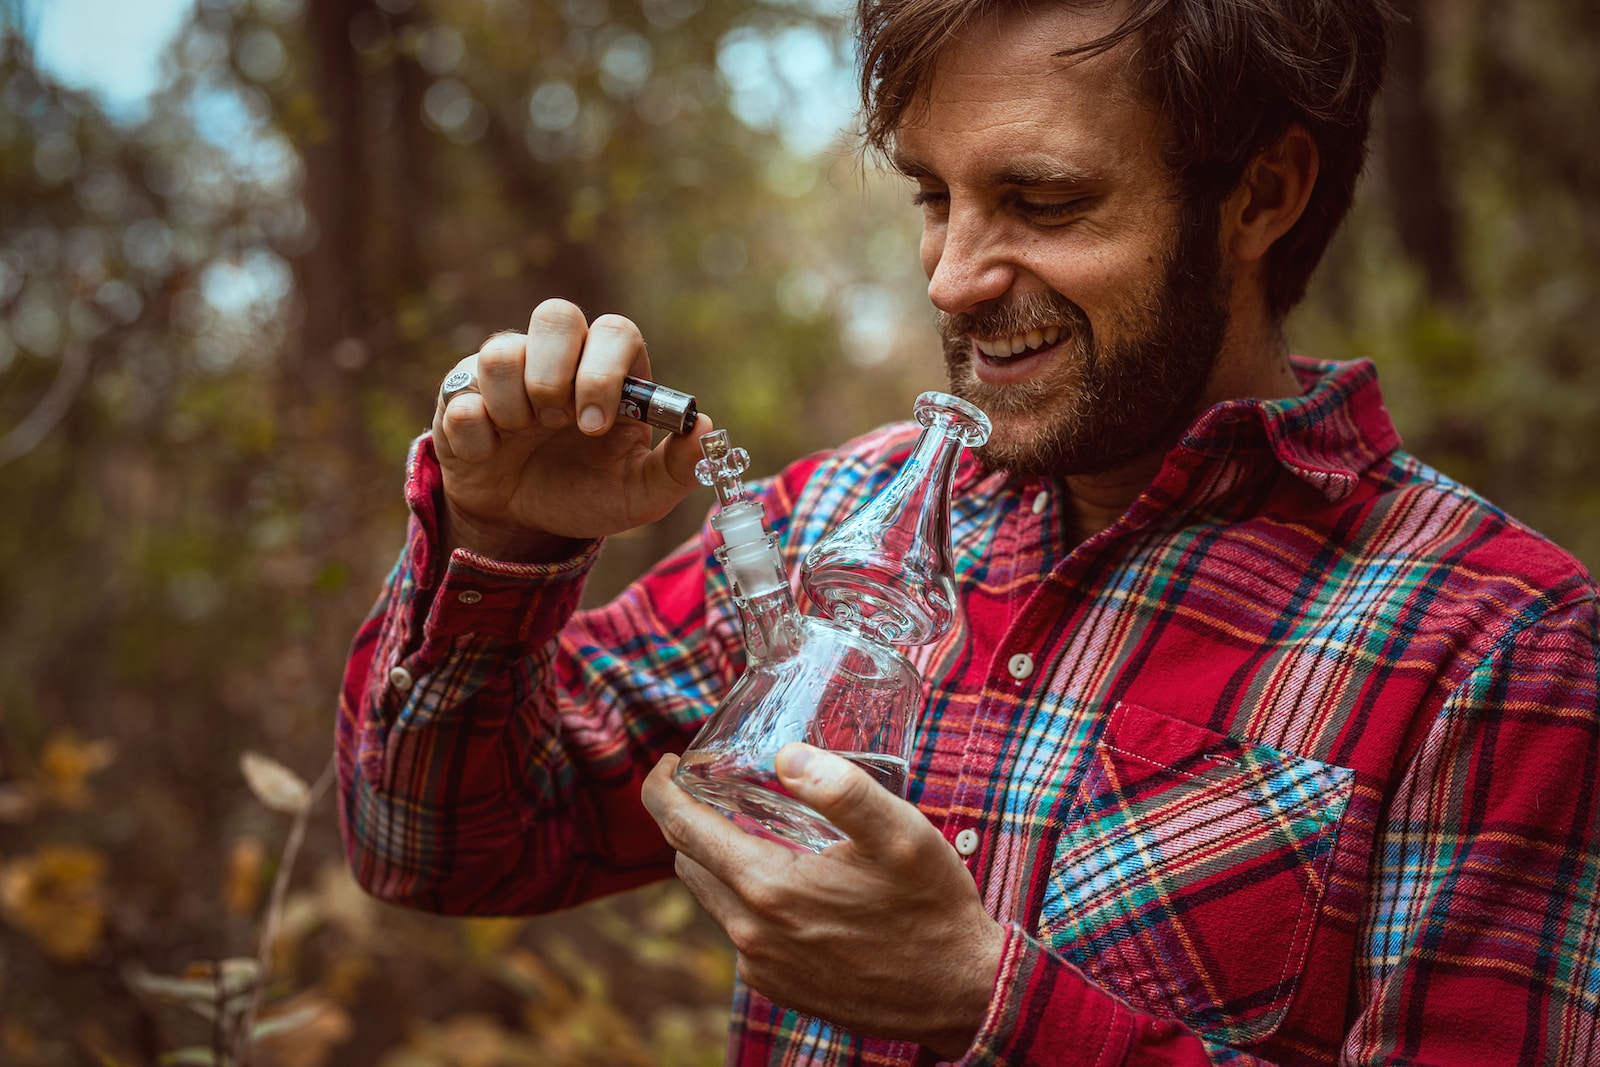 smiling man using clear glass bong